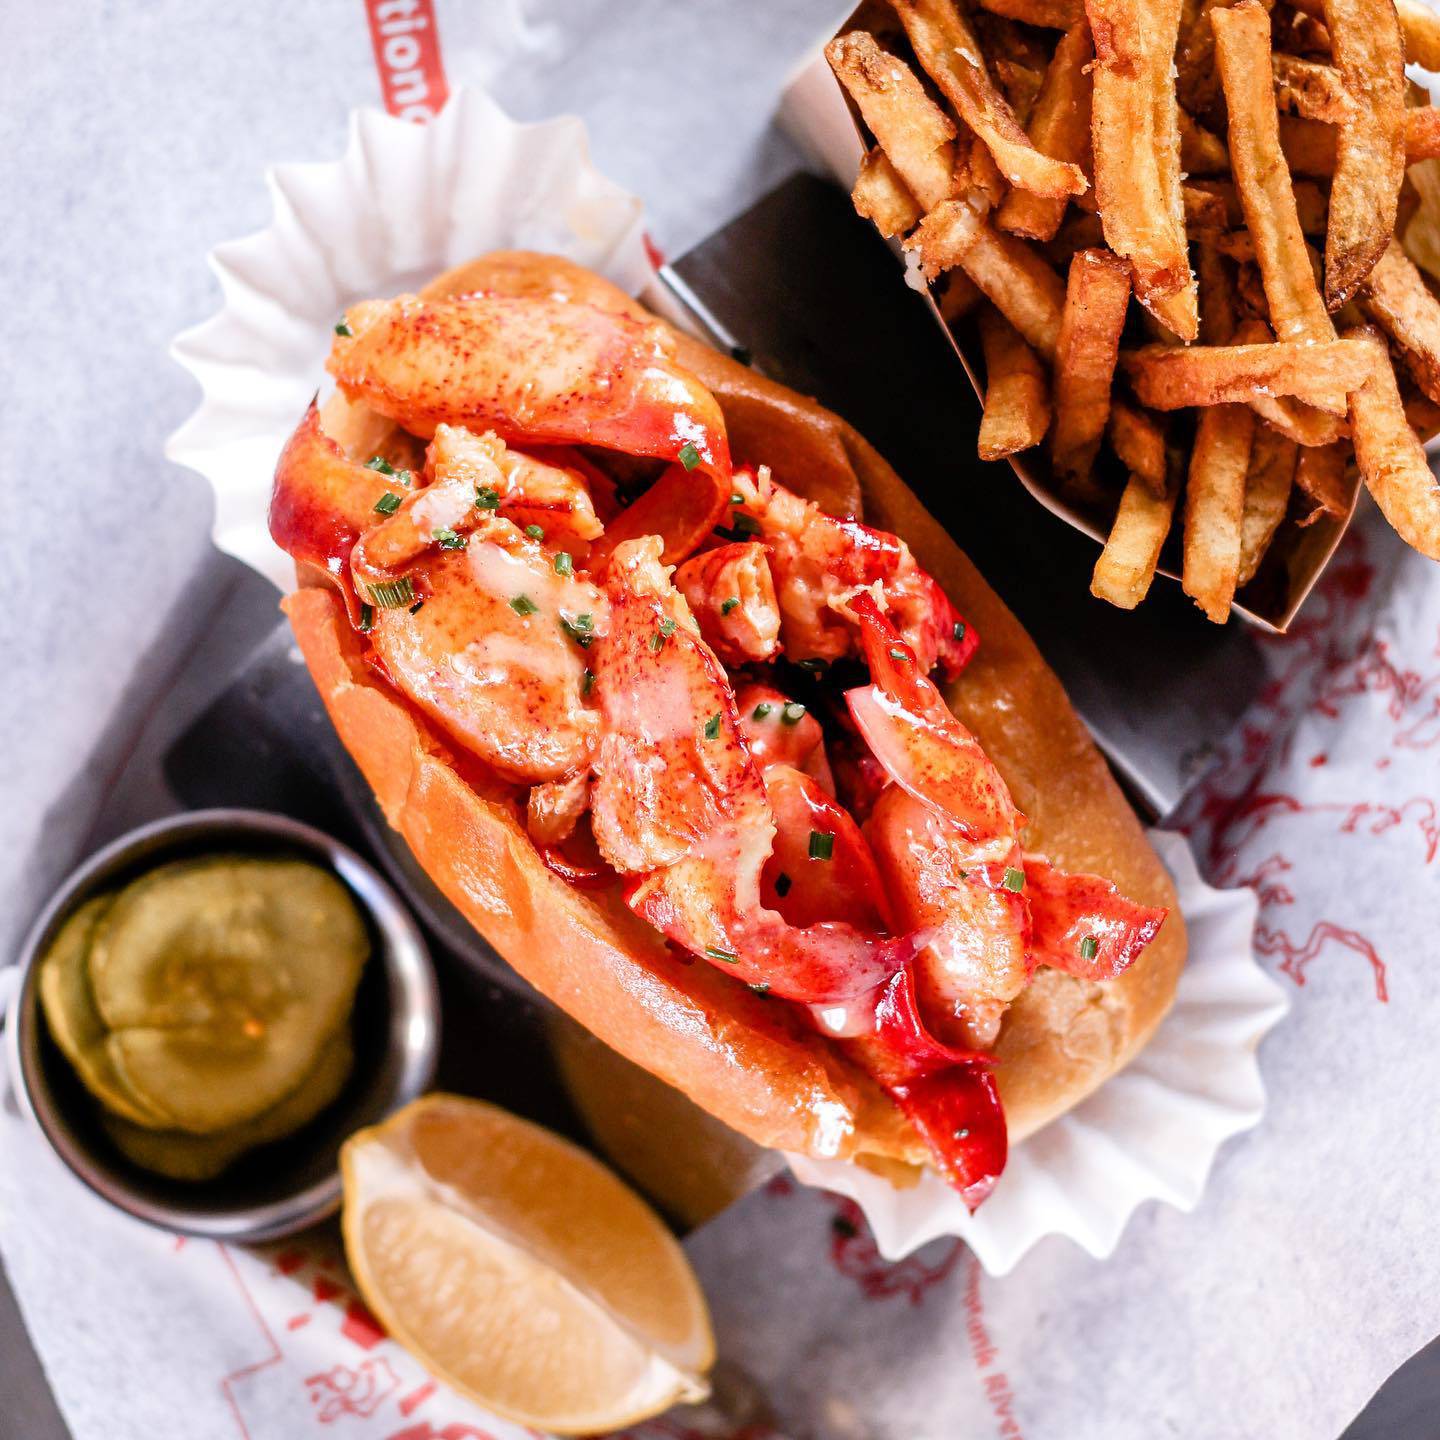 The Walrus Oyster & Ale House is selling its signature lobster roll for $12.99 during lunch.